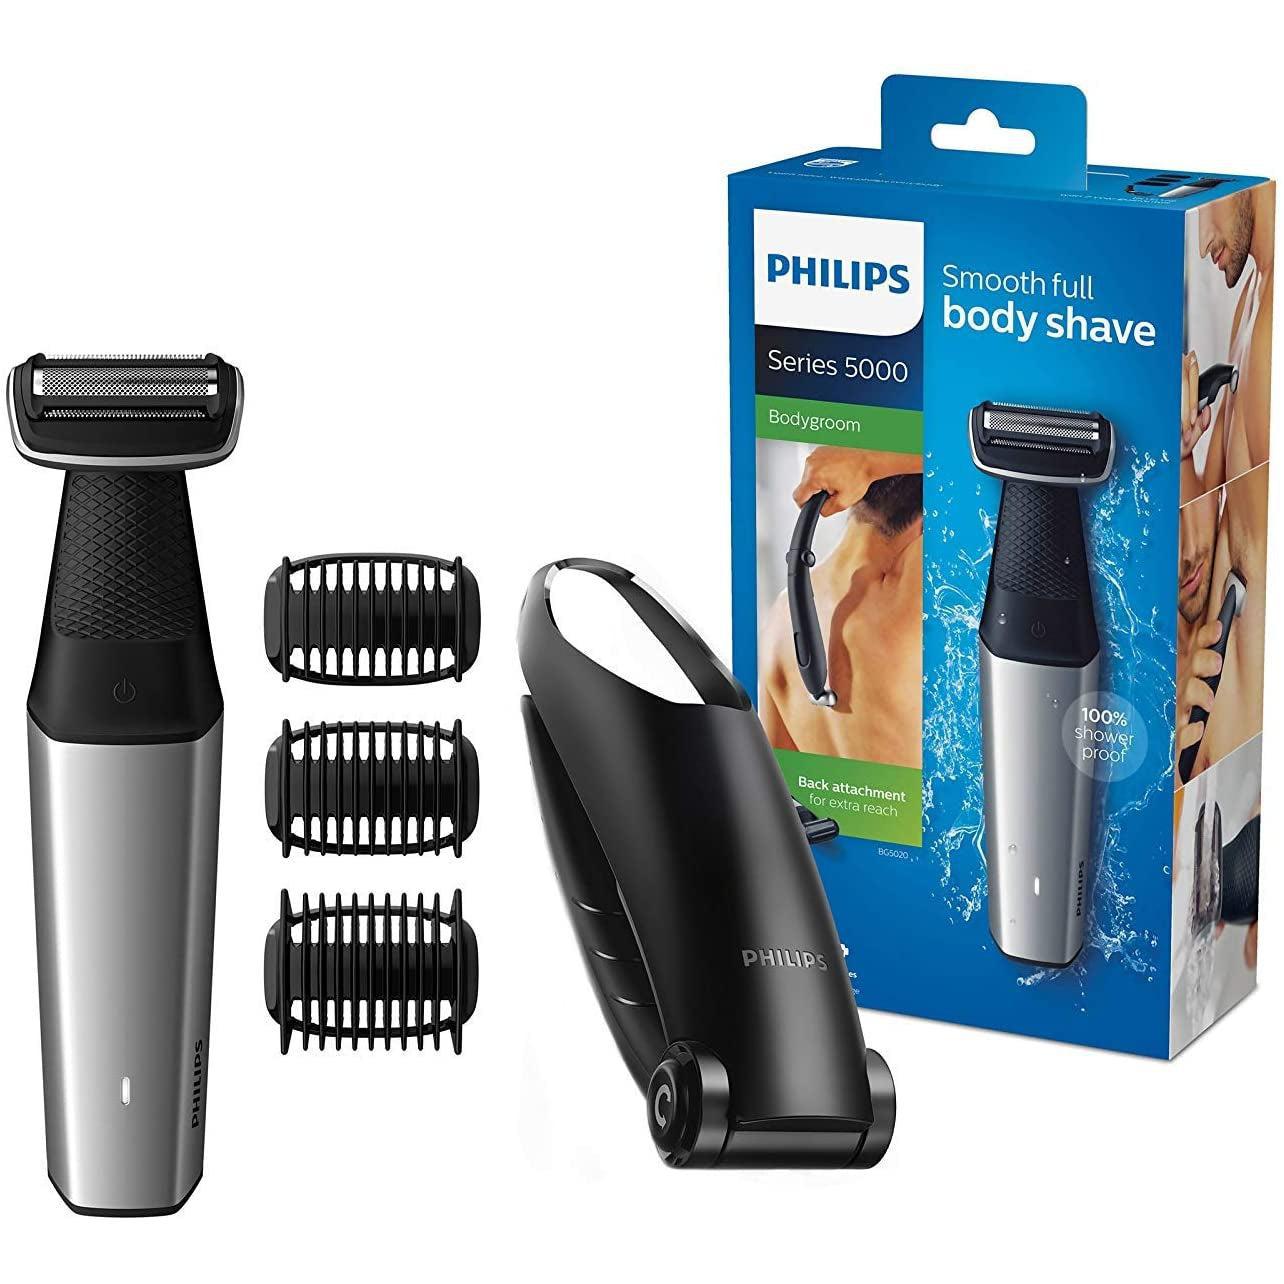 Philips BG5020/15 Bodygroom Series 5000 with Back Hair Removal Attachment and 3 Comb Attachments for Trimming - Healthxpress.ie